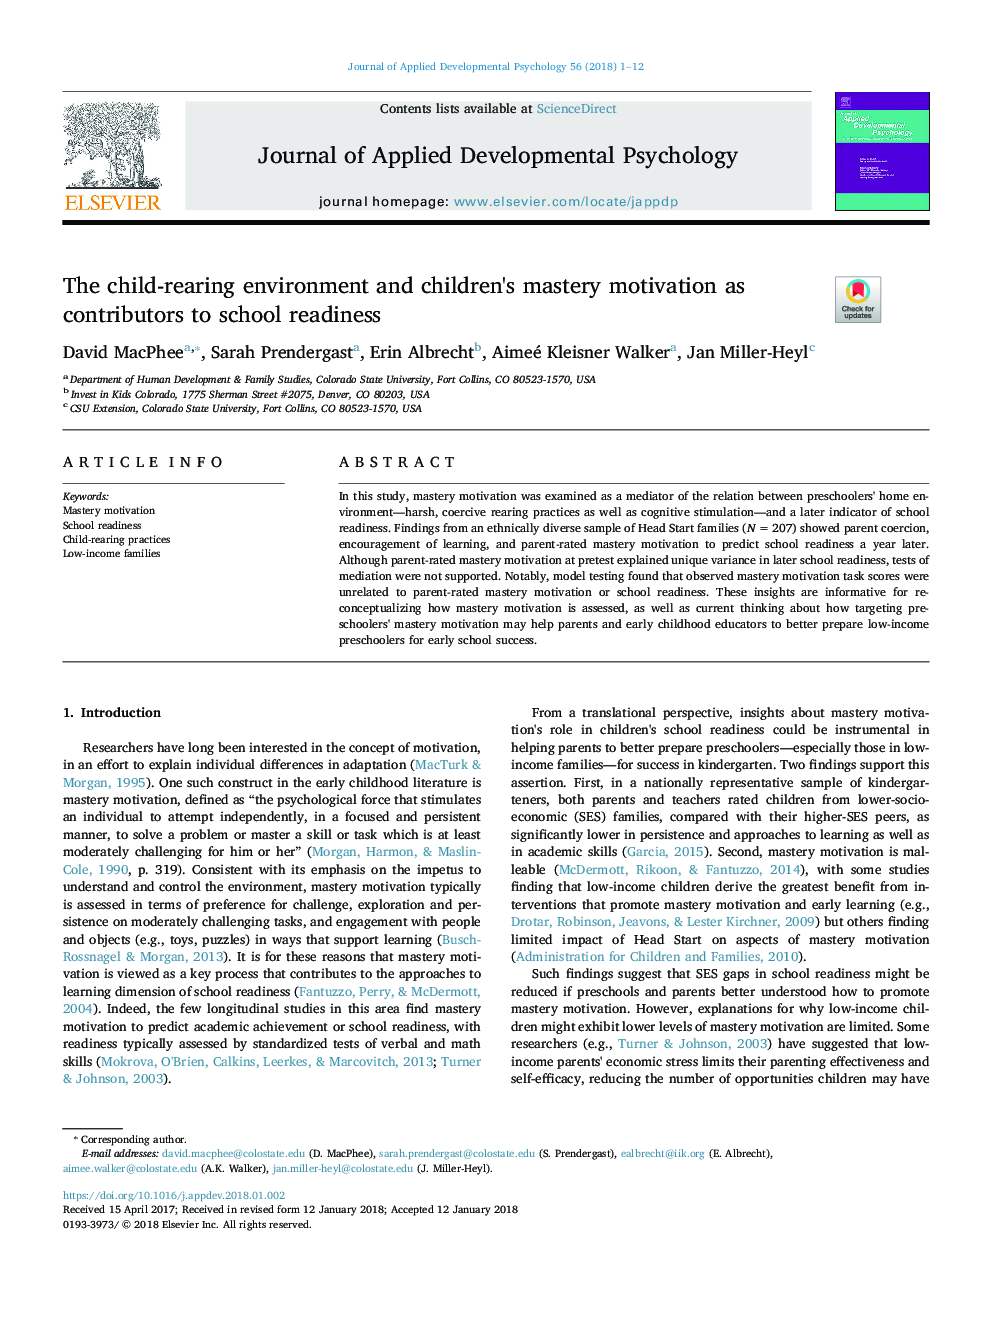 The child-rearing environment and children's mastery motivation as contributors to school readiness